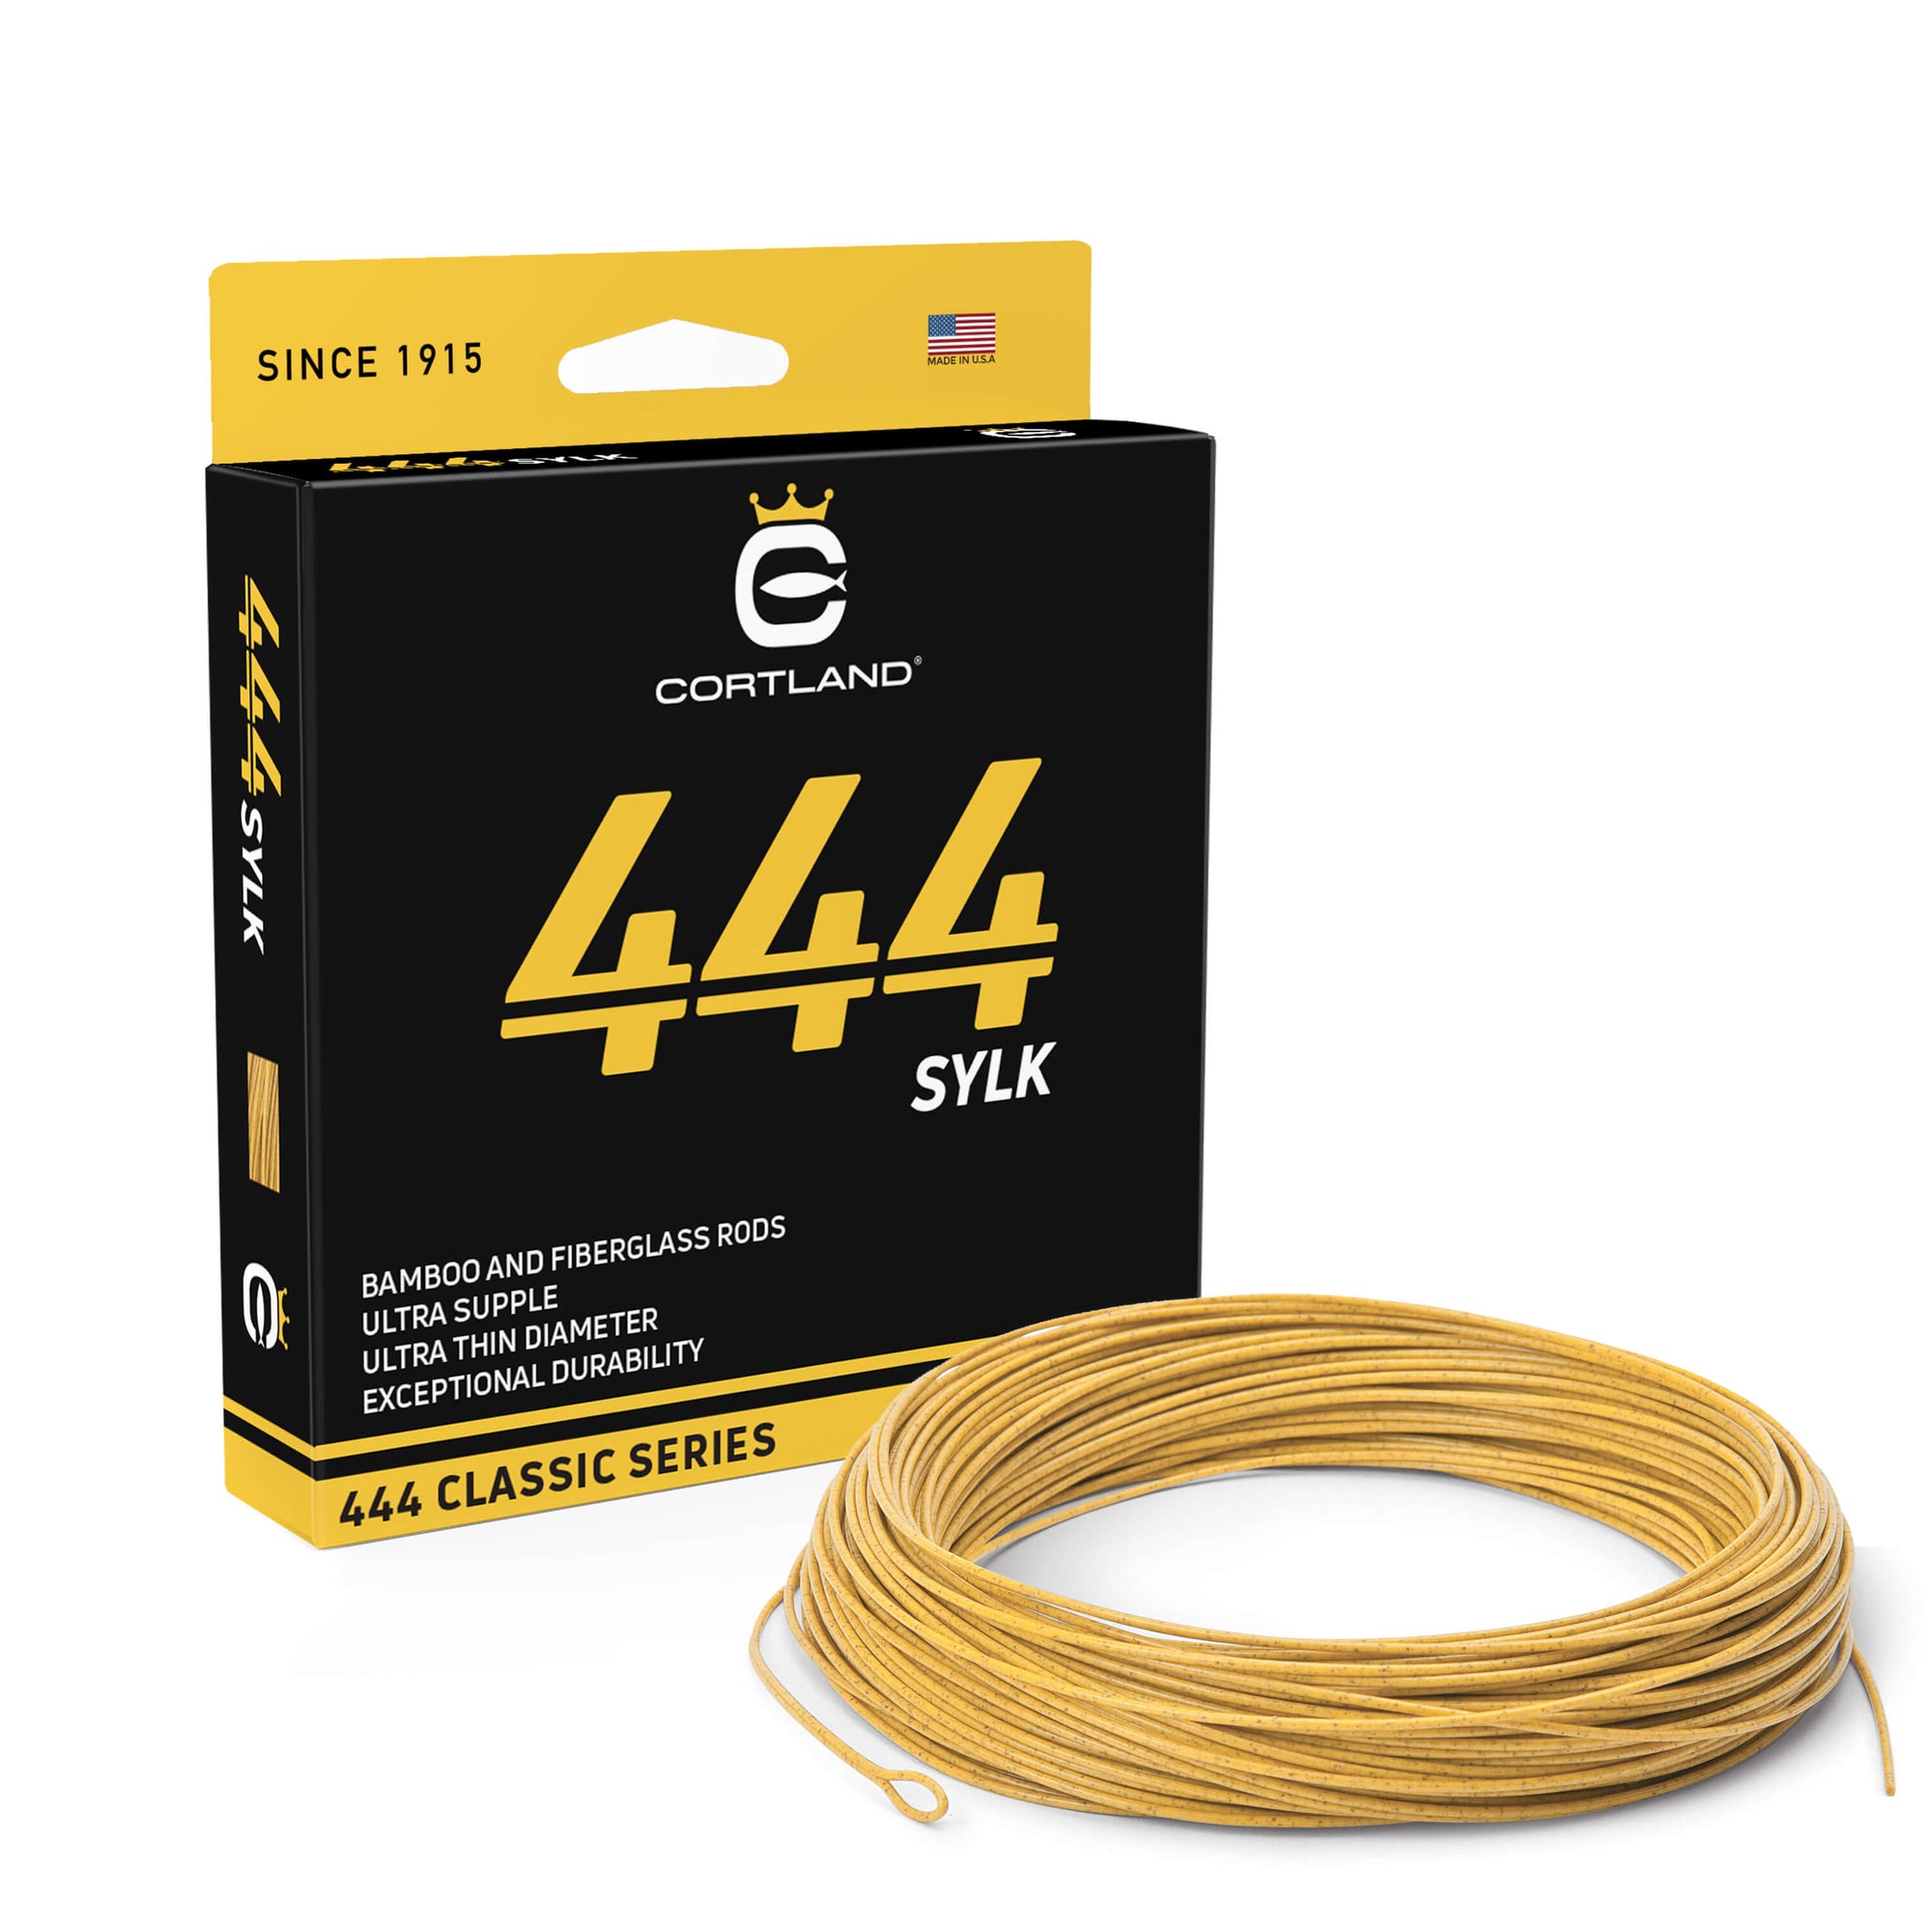 444 Series SYLK Fly Line Box and coil. The coil is mustard. The box is black and mustard. 